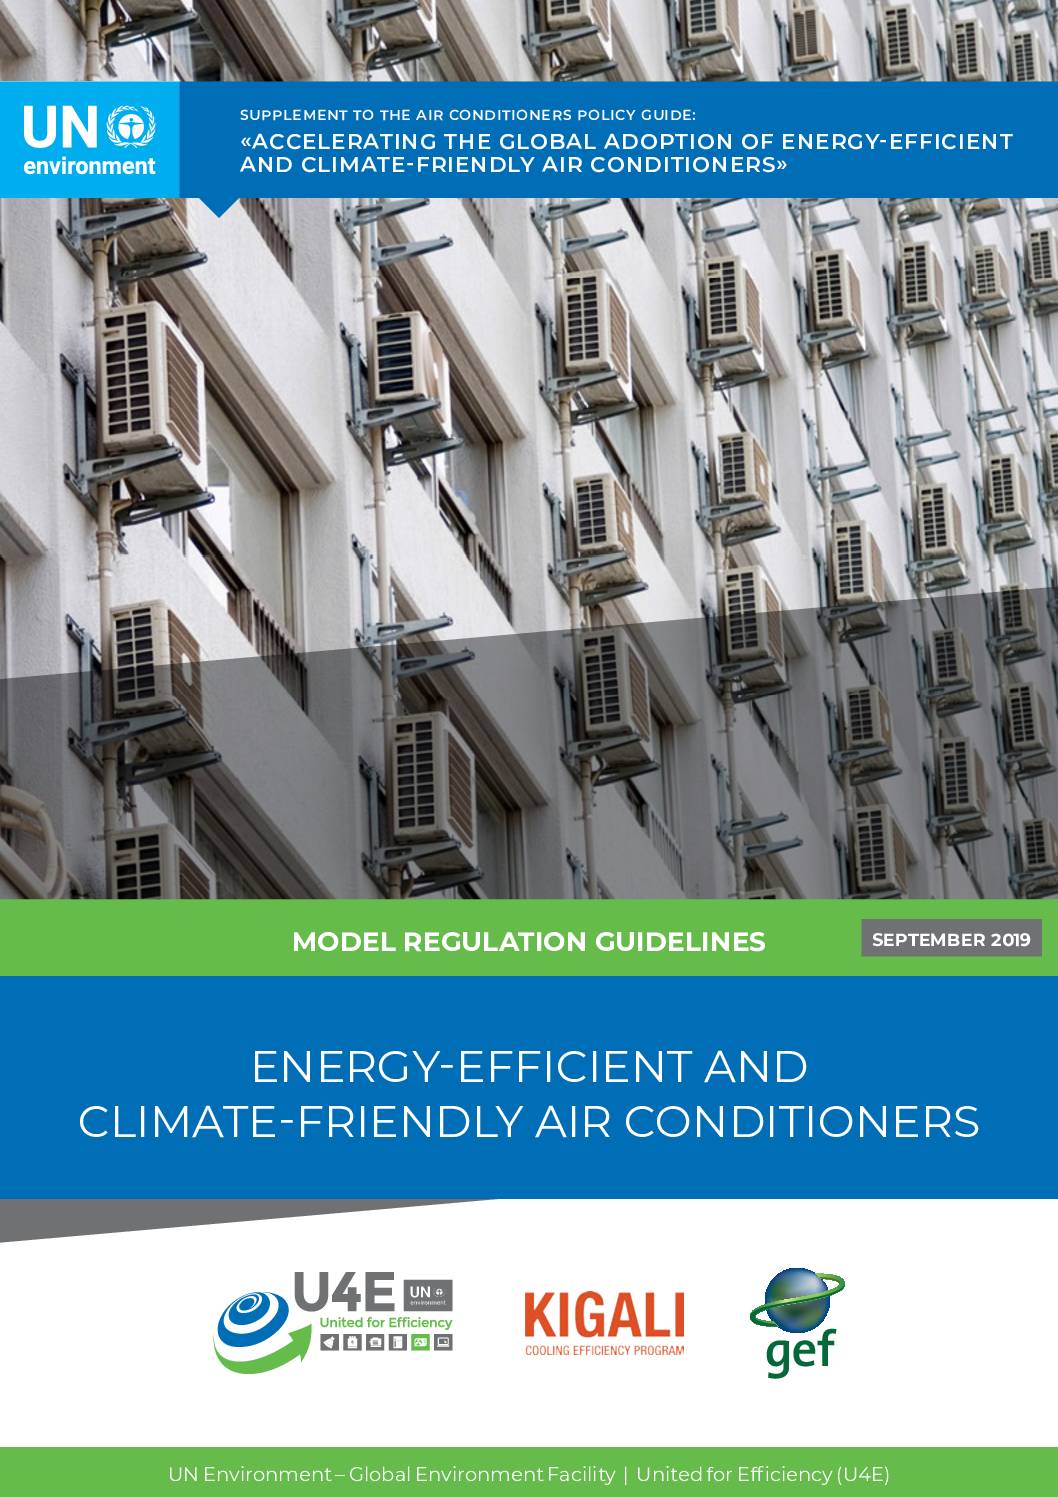 Model Regulation Guidelines For Energy-efficient And Climate-friendly Air Conditioners